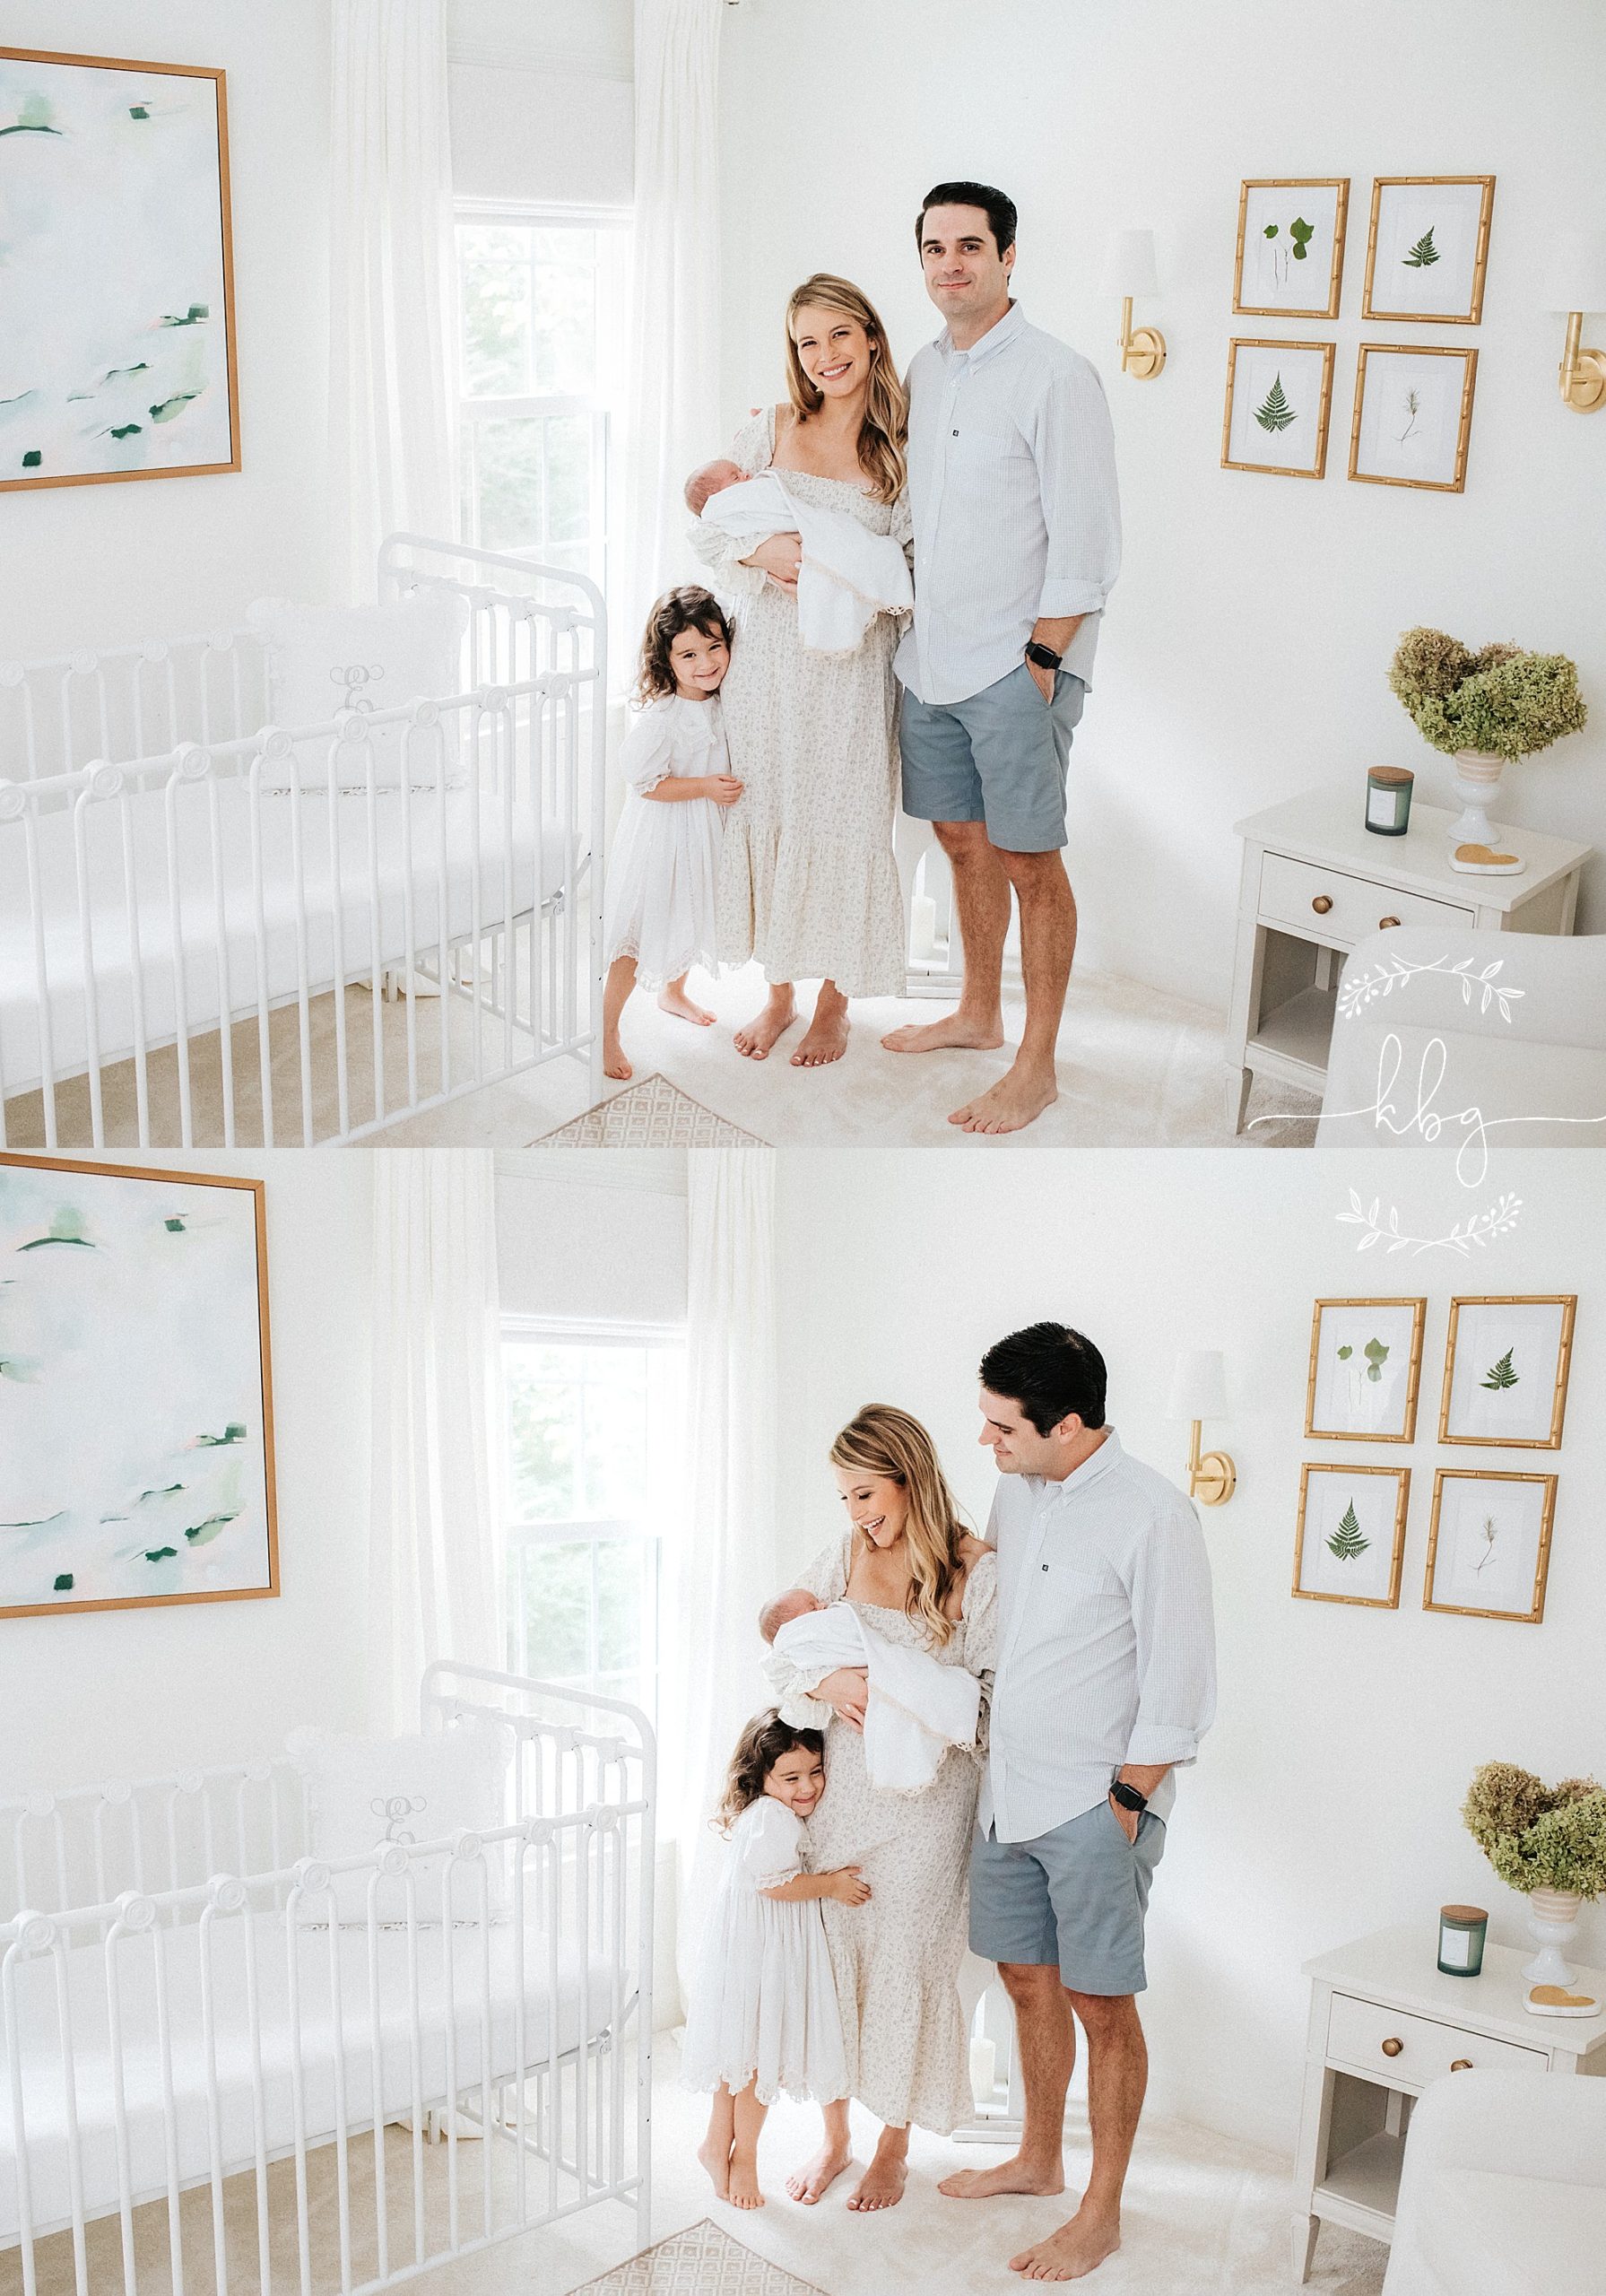 new family of four standing and posing in nursery - atlanta family photographer